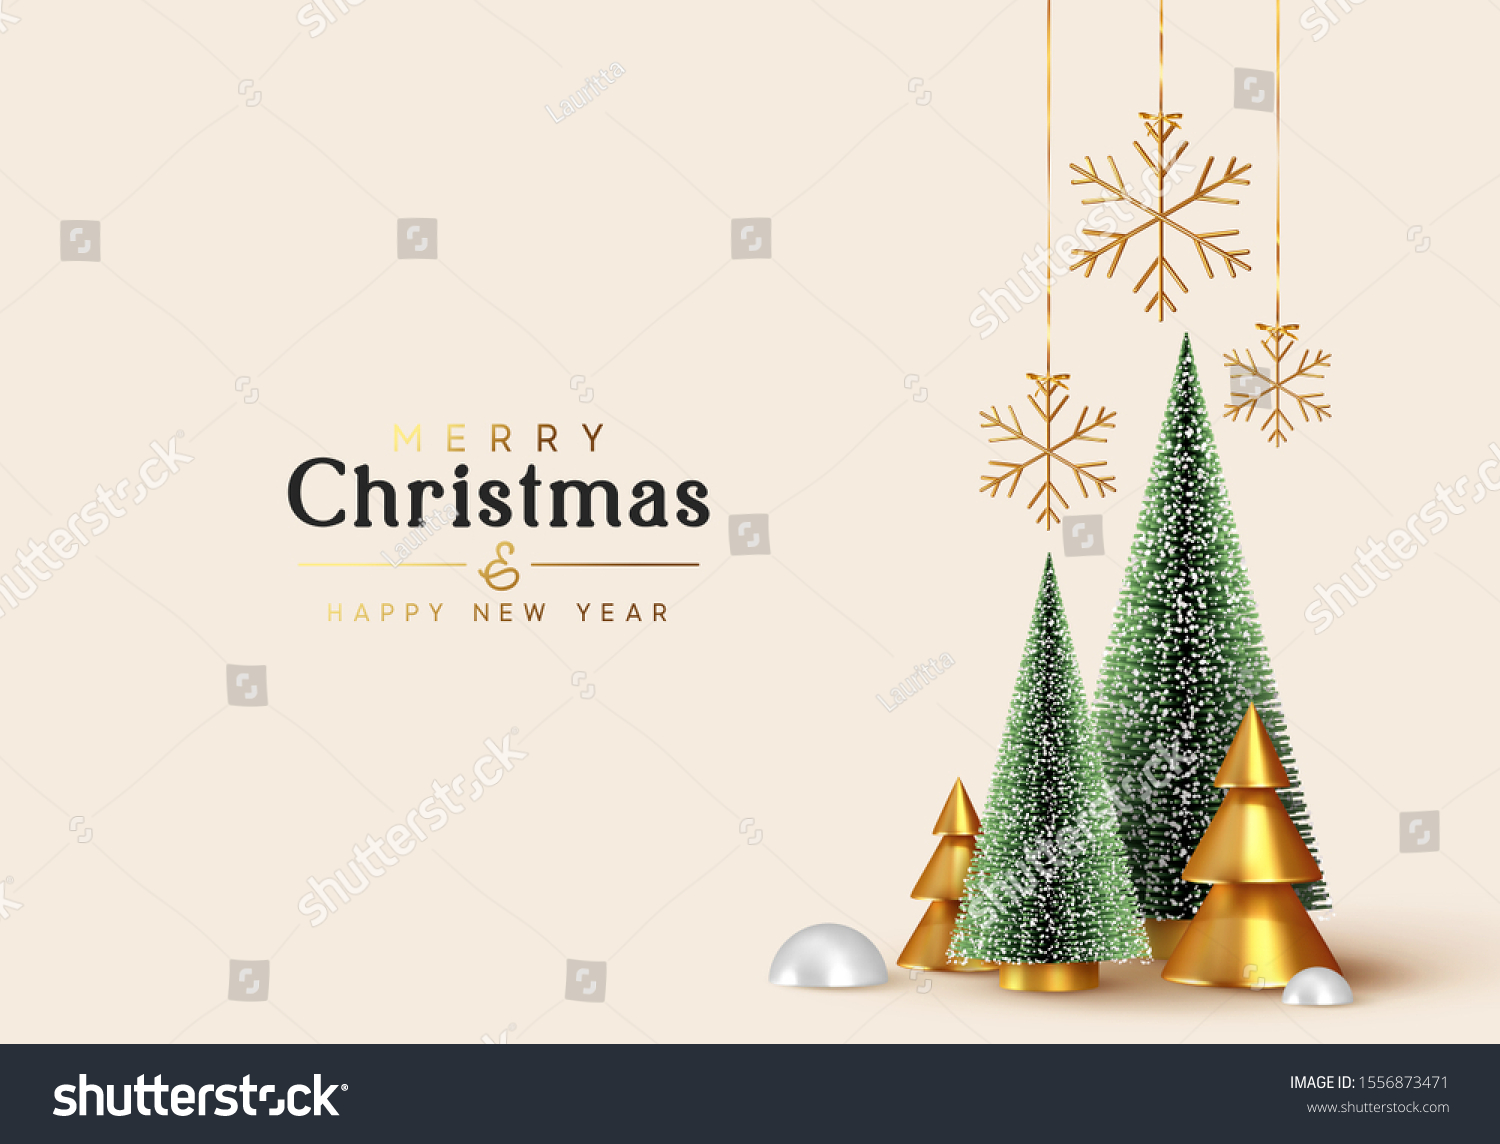 Christmas and New Year background. Xmas pine fir lush tree. Conical Abstract Gold Christmas Trees. Snowflakes hanging on ribbon. Bright Winter holiday composition. Greeting card, banner, poster #1556873471